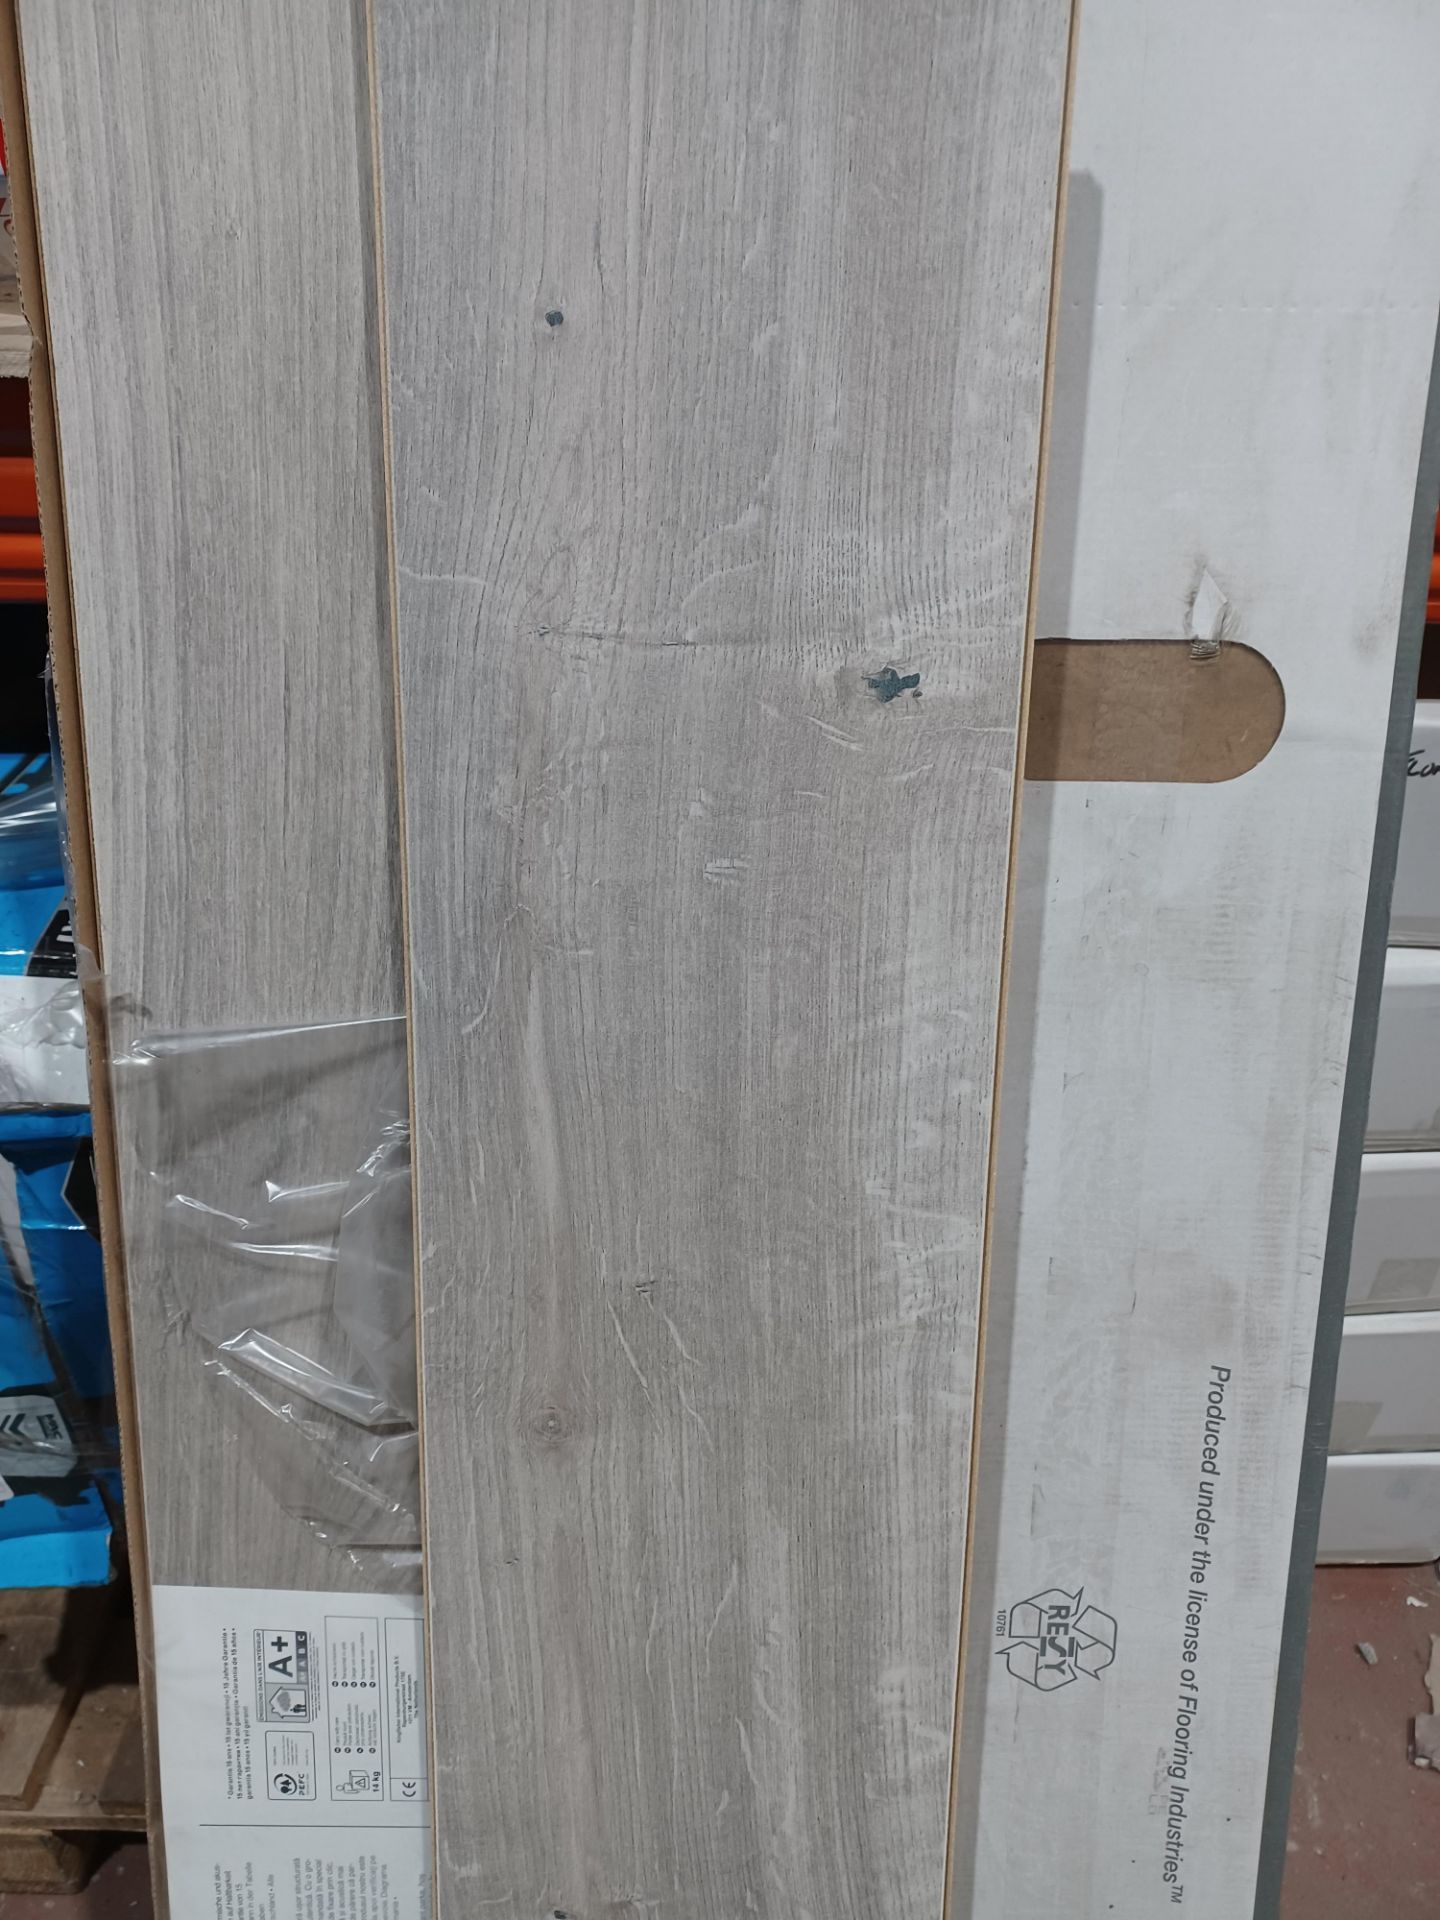 12 x PACKS OF GLADSTONE GREY OAK EFFECT LAMINATE FLOORING. EACH PACK CONTAINS 1.99M2, GIVING THIS - Image 2 of 2